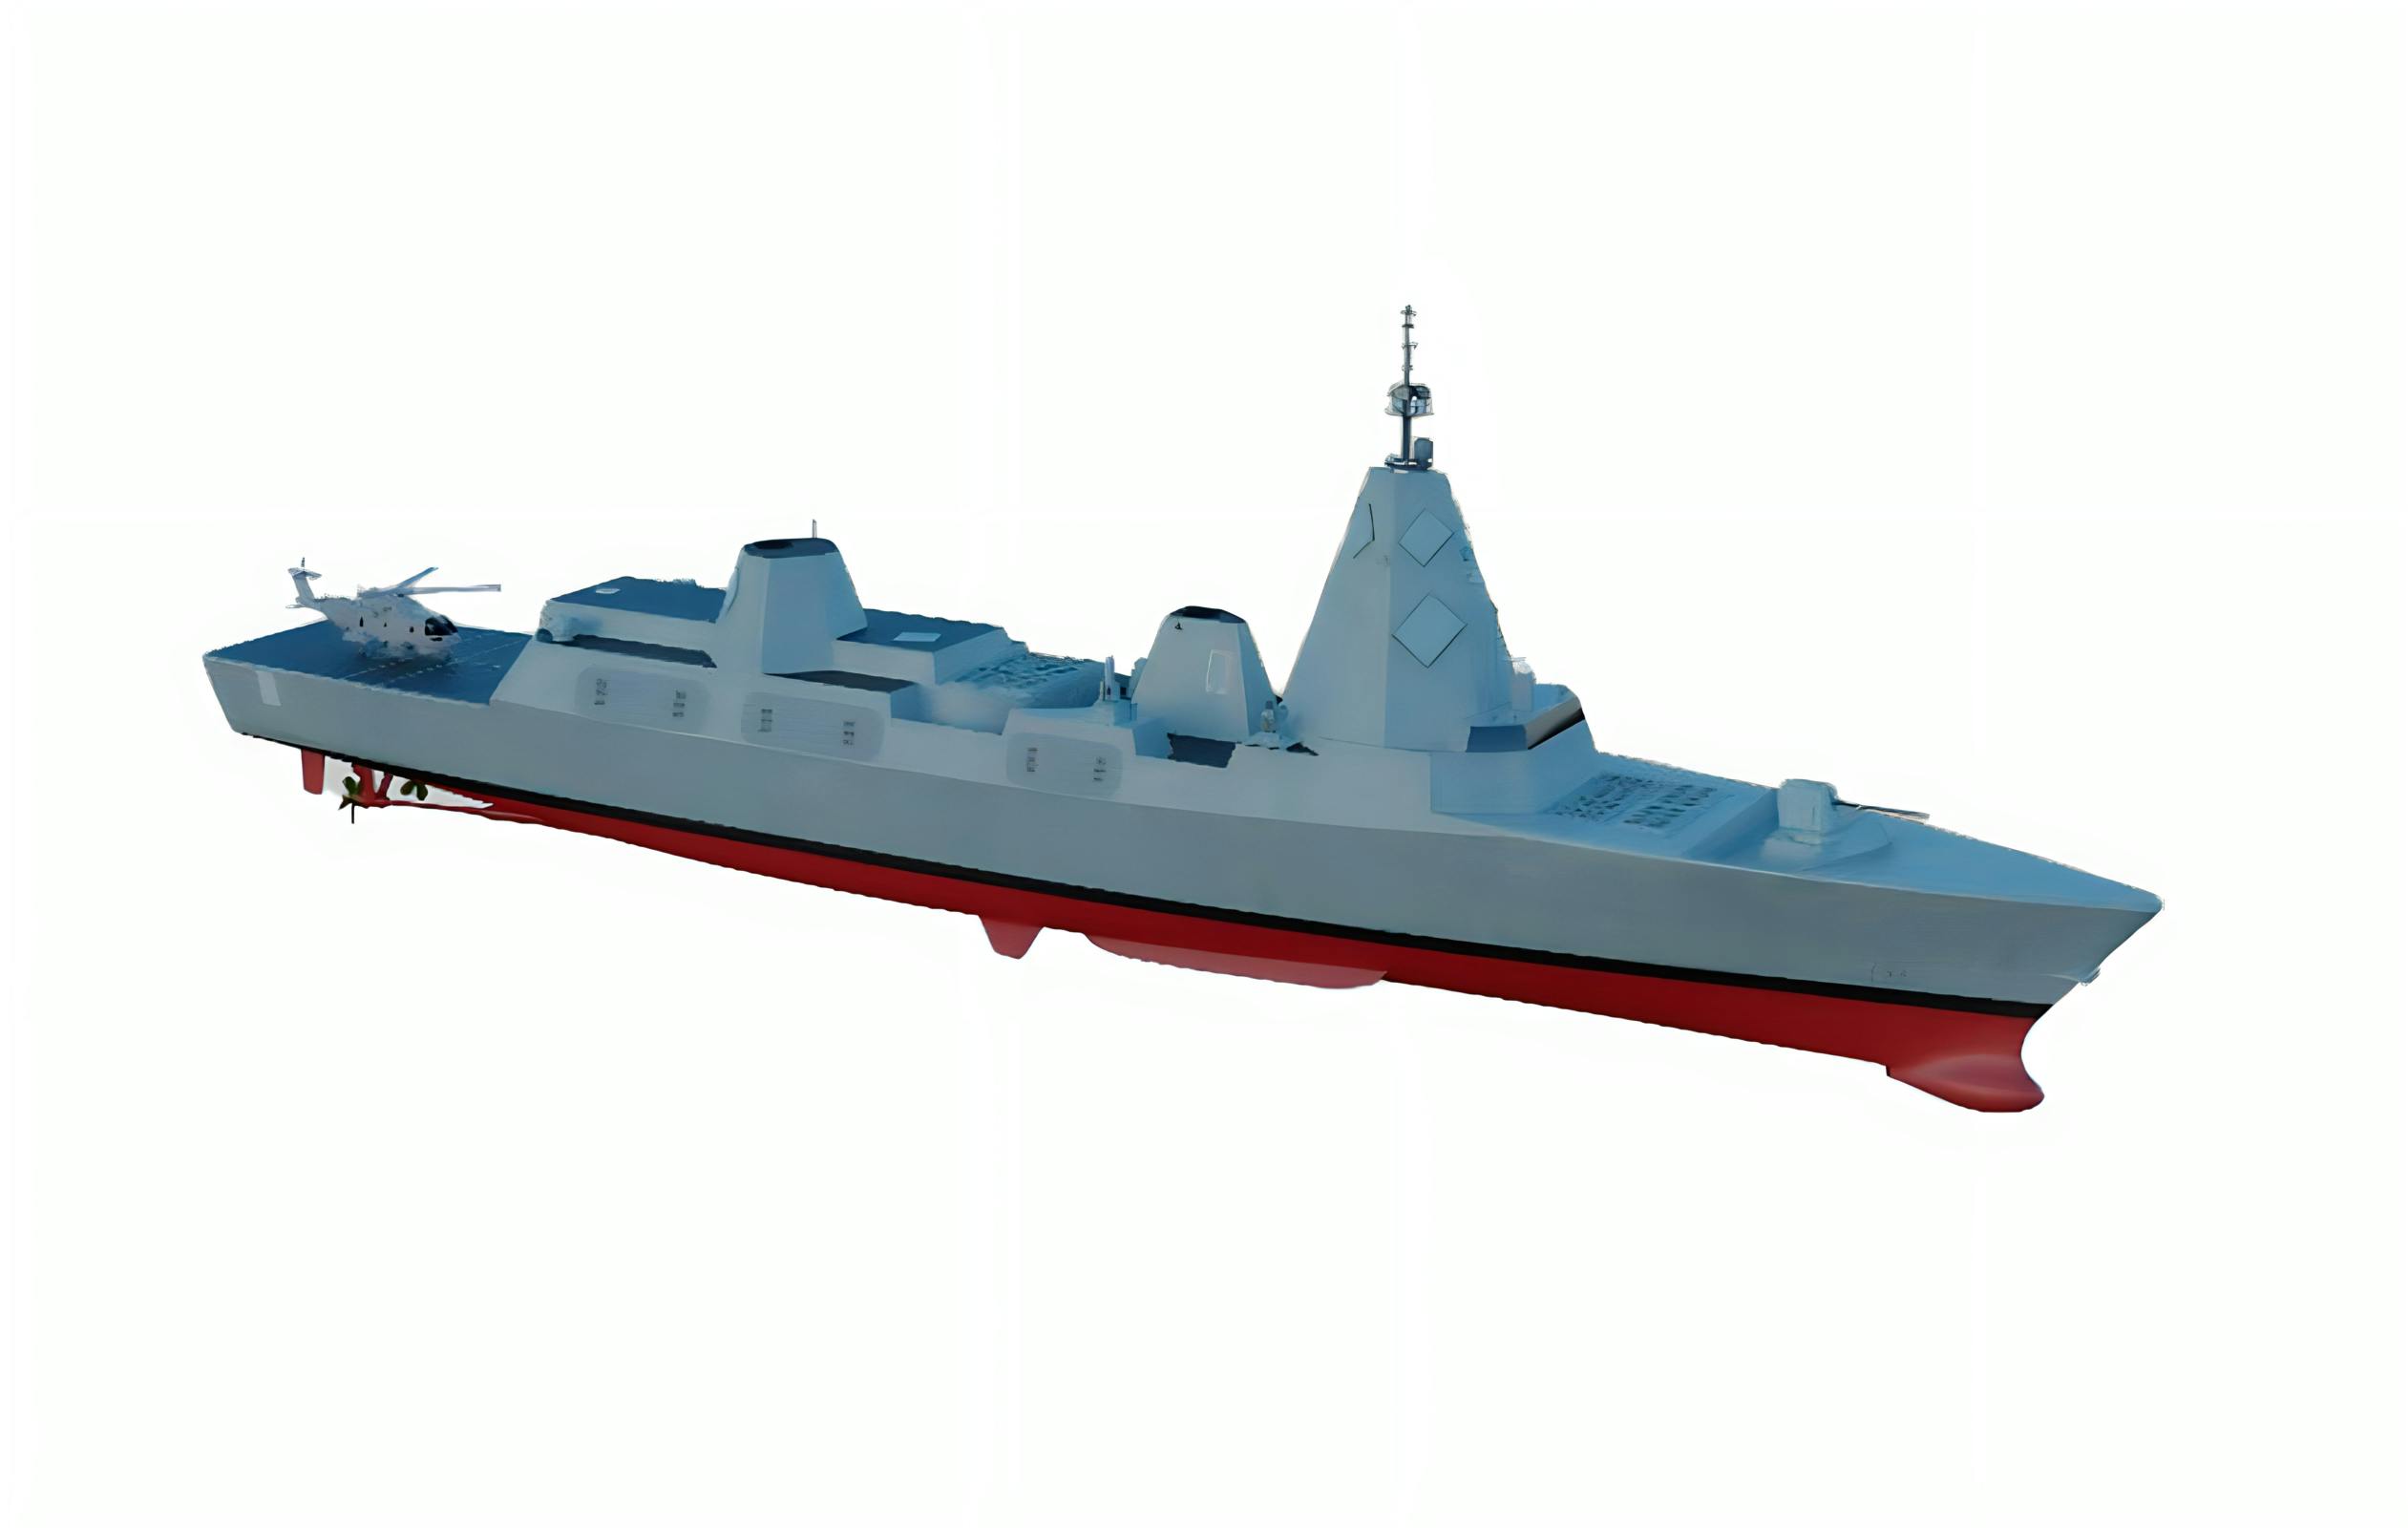 Britain's new warship – A Type 83 Destroyer concept surfaces